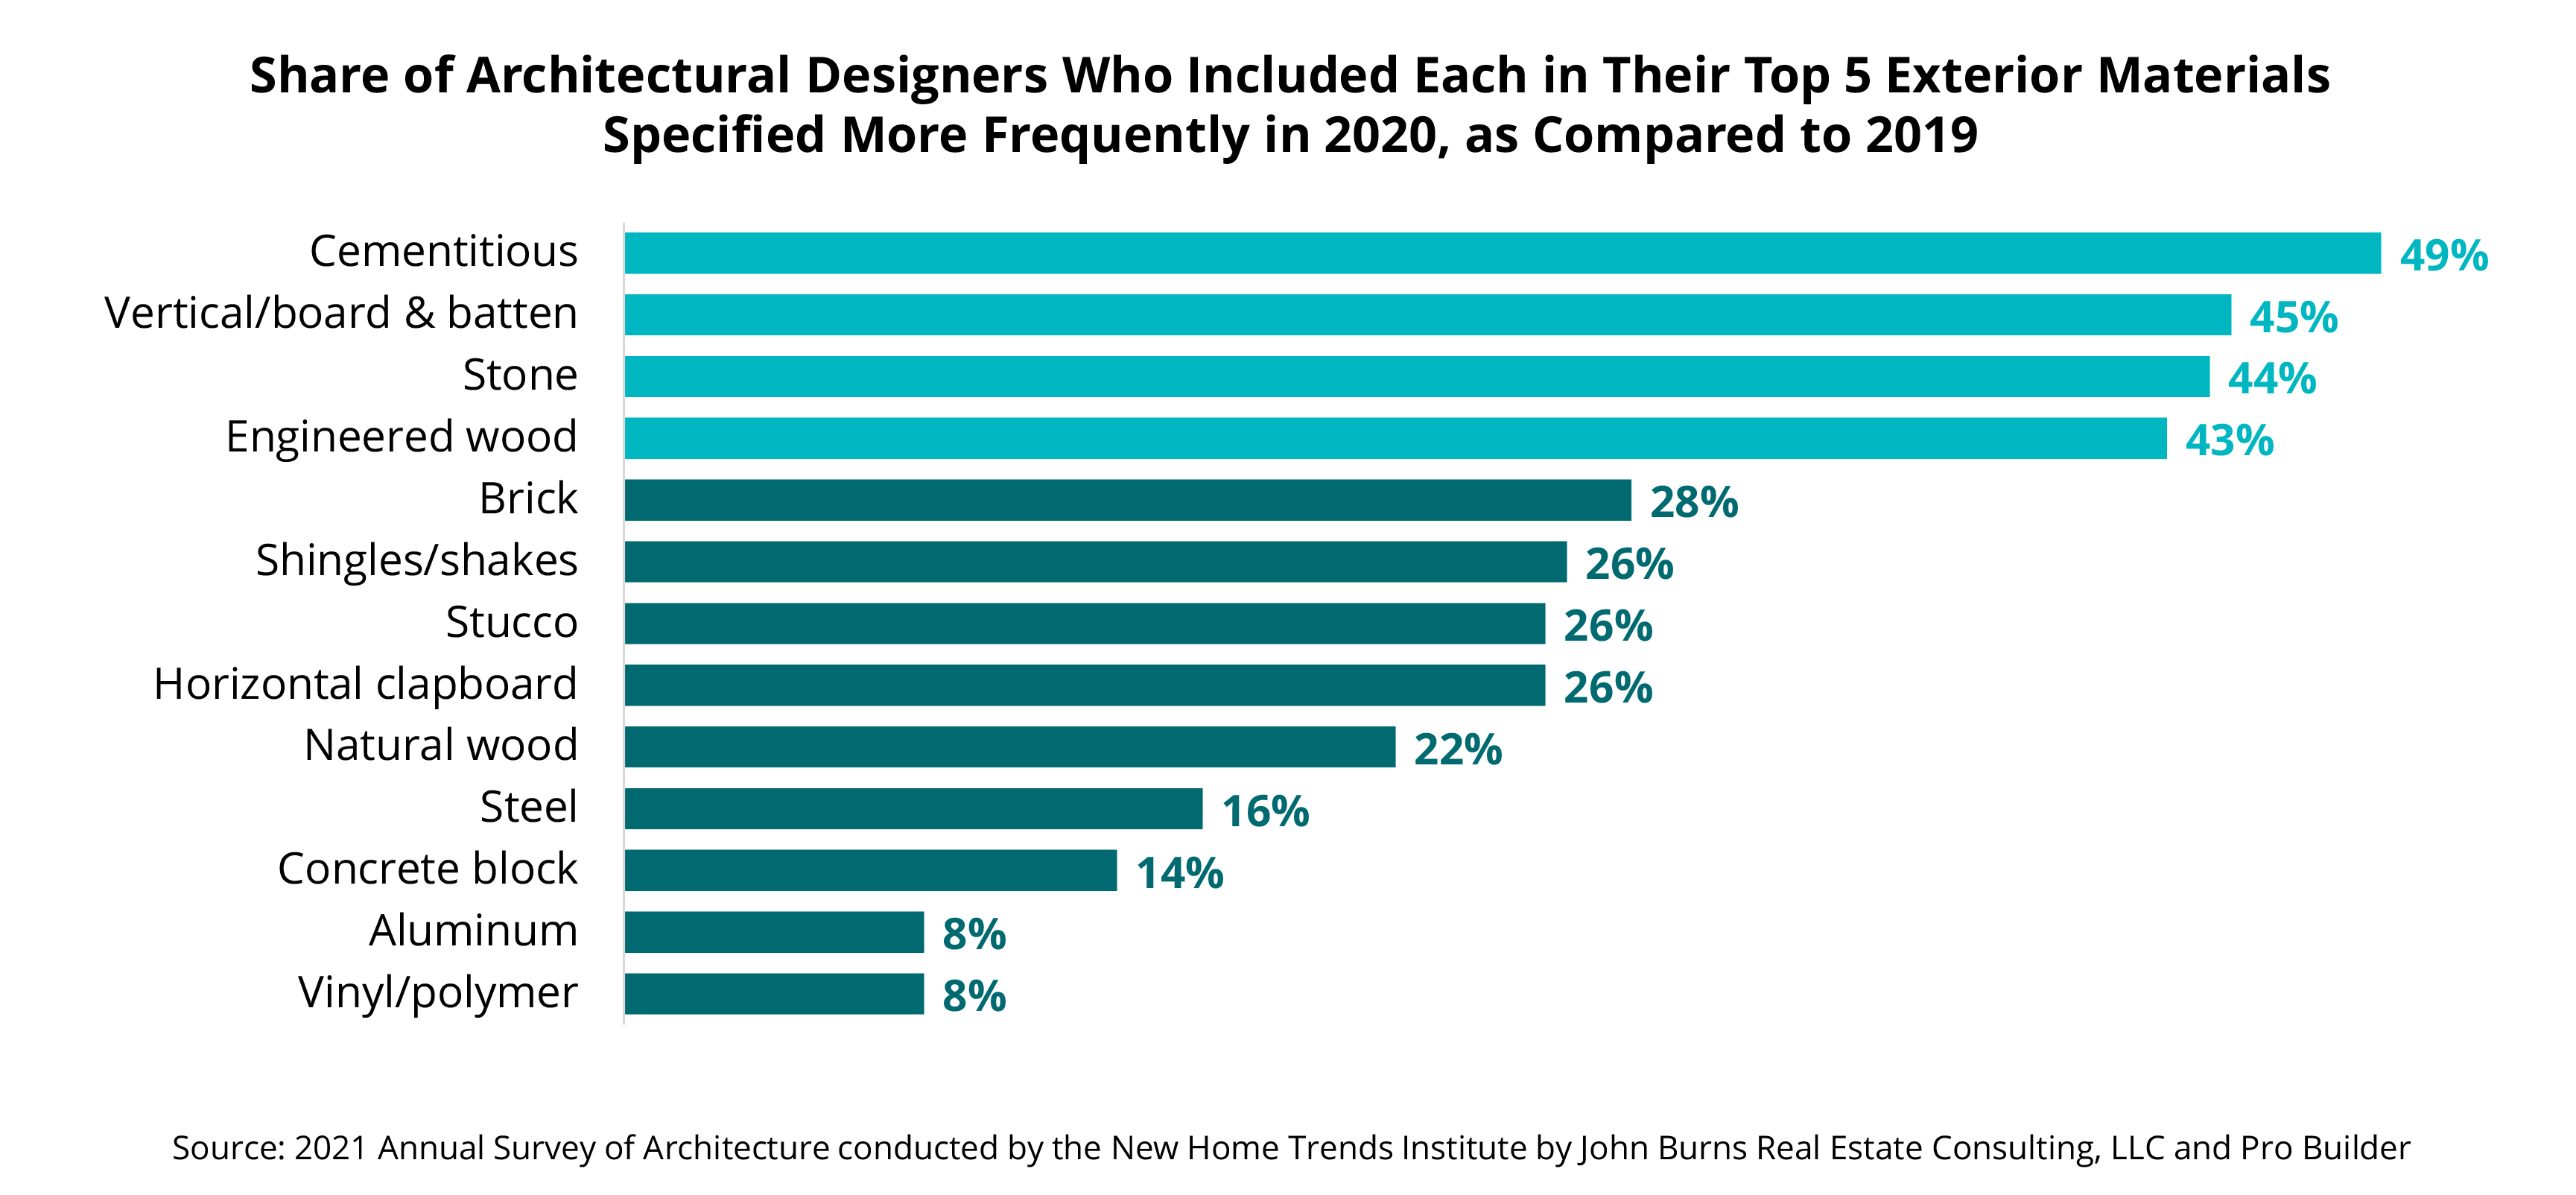 Share of architectural designers who included each in their top 5 exterior materials specified more frequently in 2020, as compared to 2019